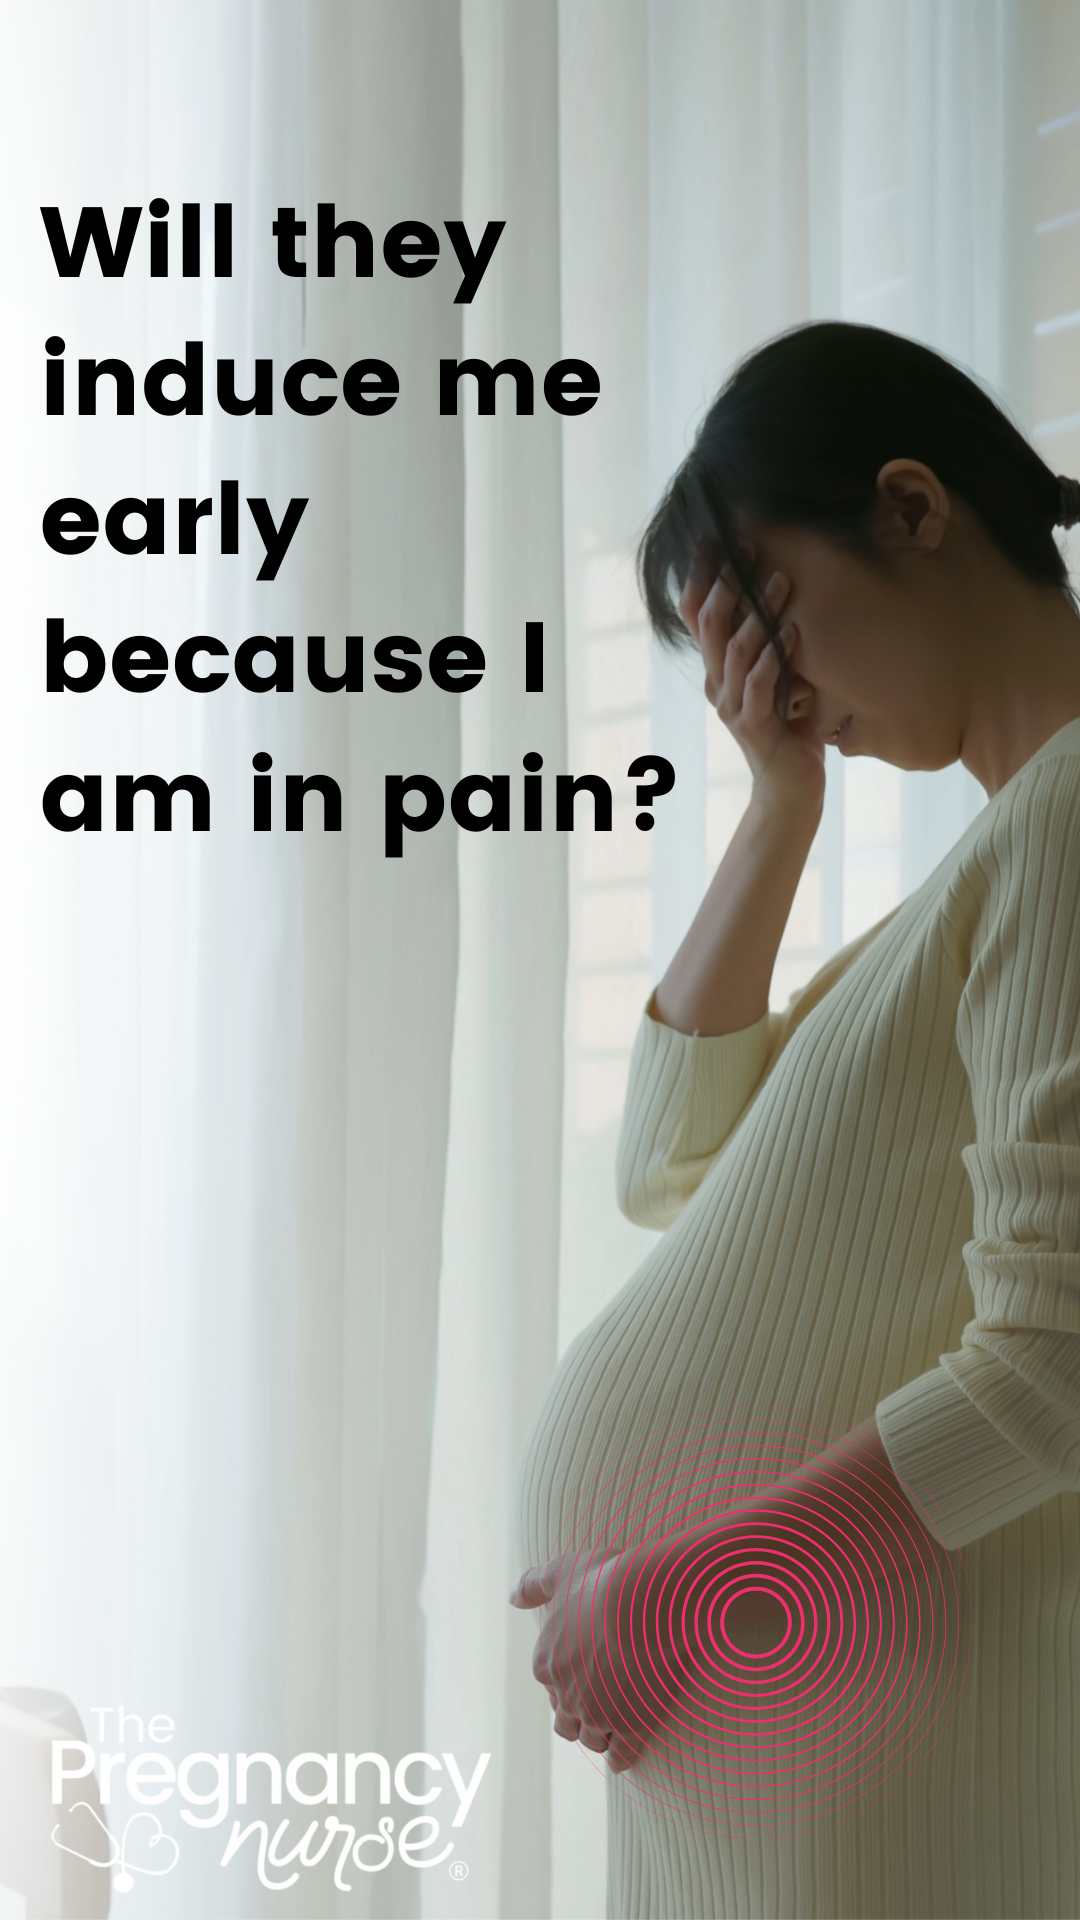 If you're 37 weeks pregnant and dealing with pain, you may be wondering if you can be induced earlier than expected. Induction of labor at 37 weeks is possible, but not always recommended. Before you make any decisions, it's important to learn more about the risks associated with early induction and talk to your health care provider to decide if it's the right choice for your situation.